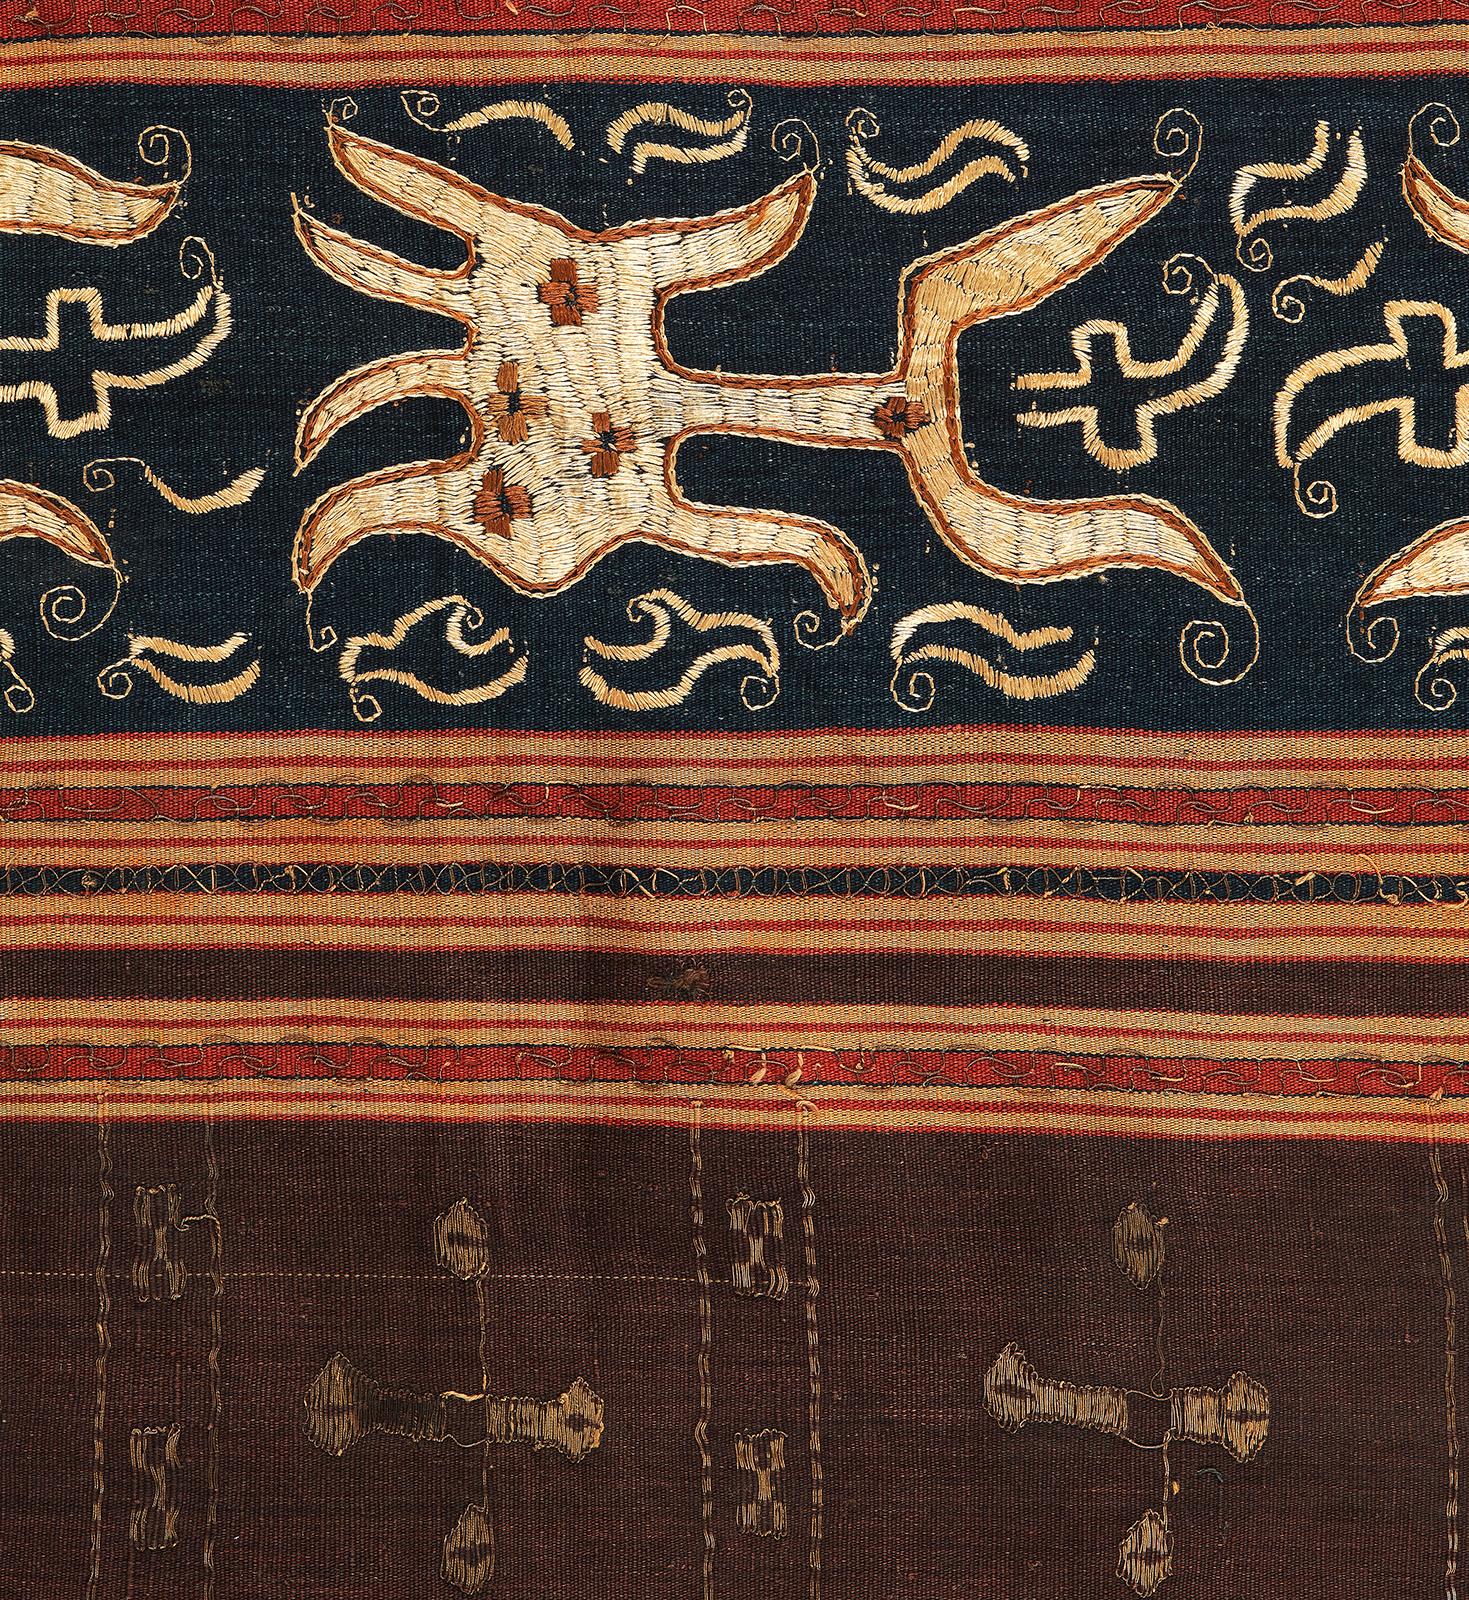 Tribal Antique Indonesian Ceremonial Textile, Lampung People, Sumatra For Sale